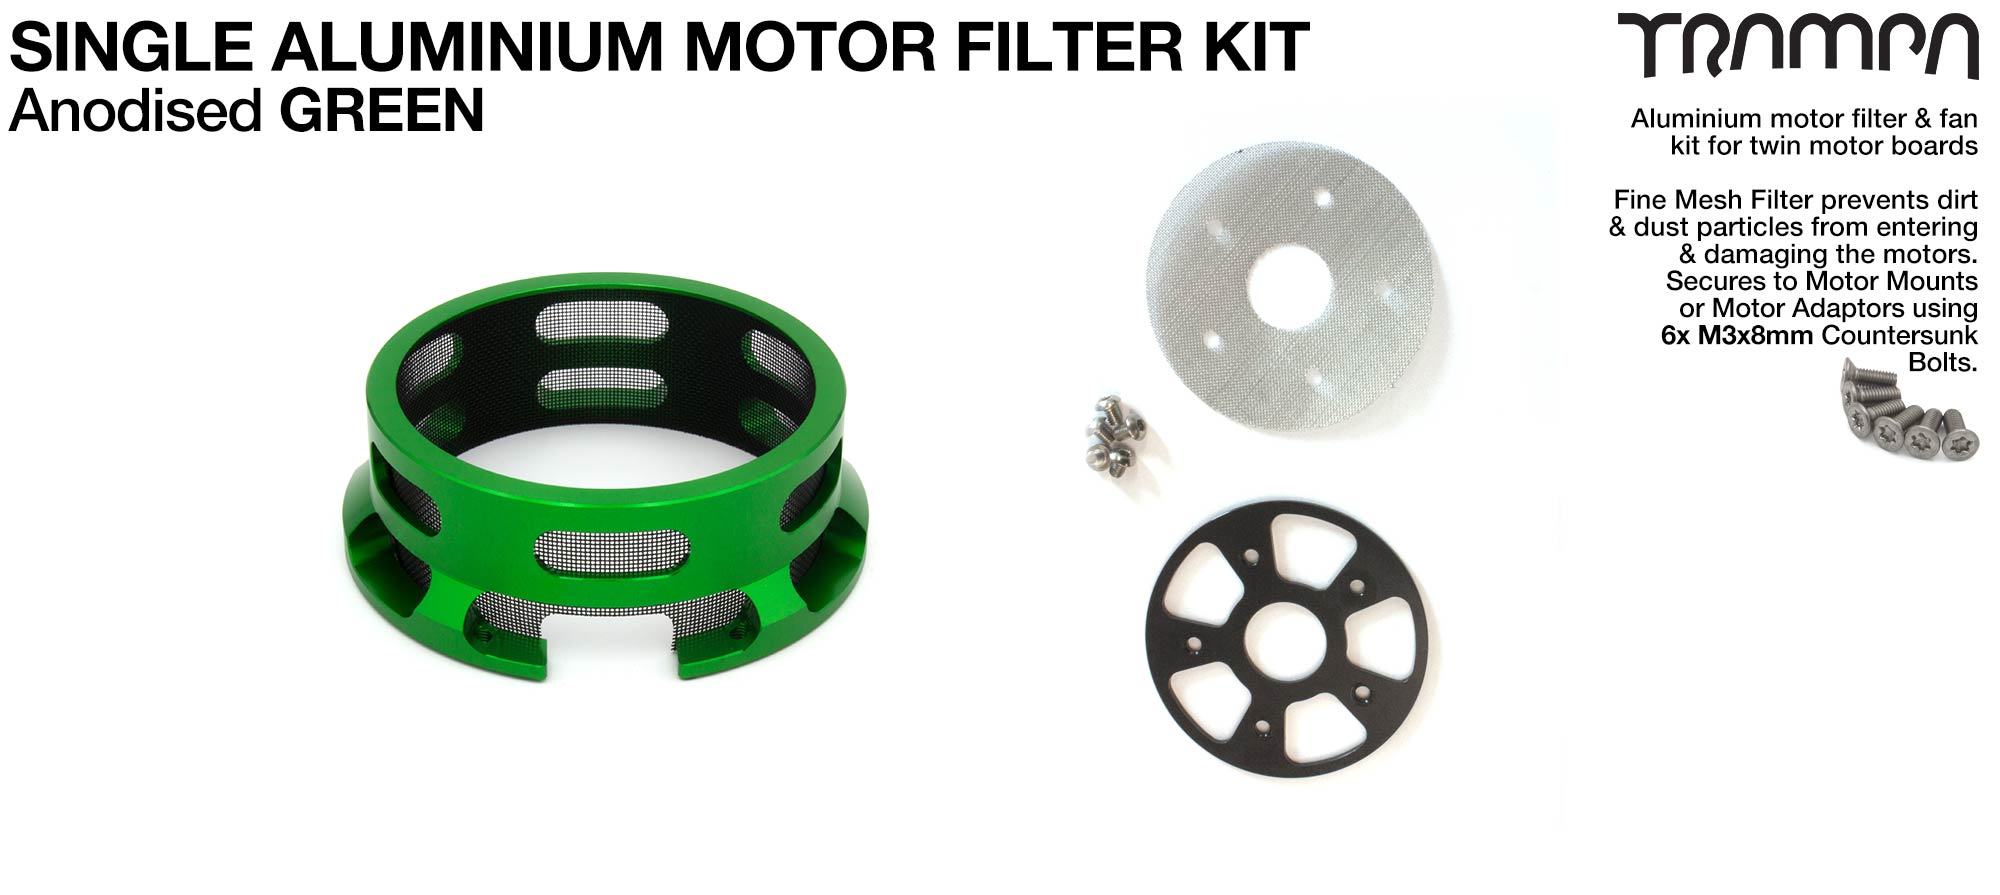 HALF CAGE Motor protection  - GREEN anodised with Filters - SINGLE